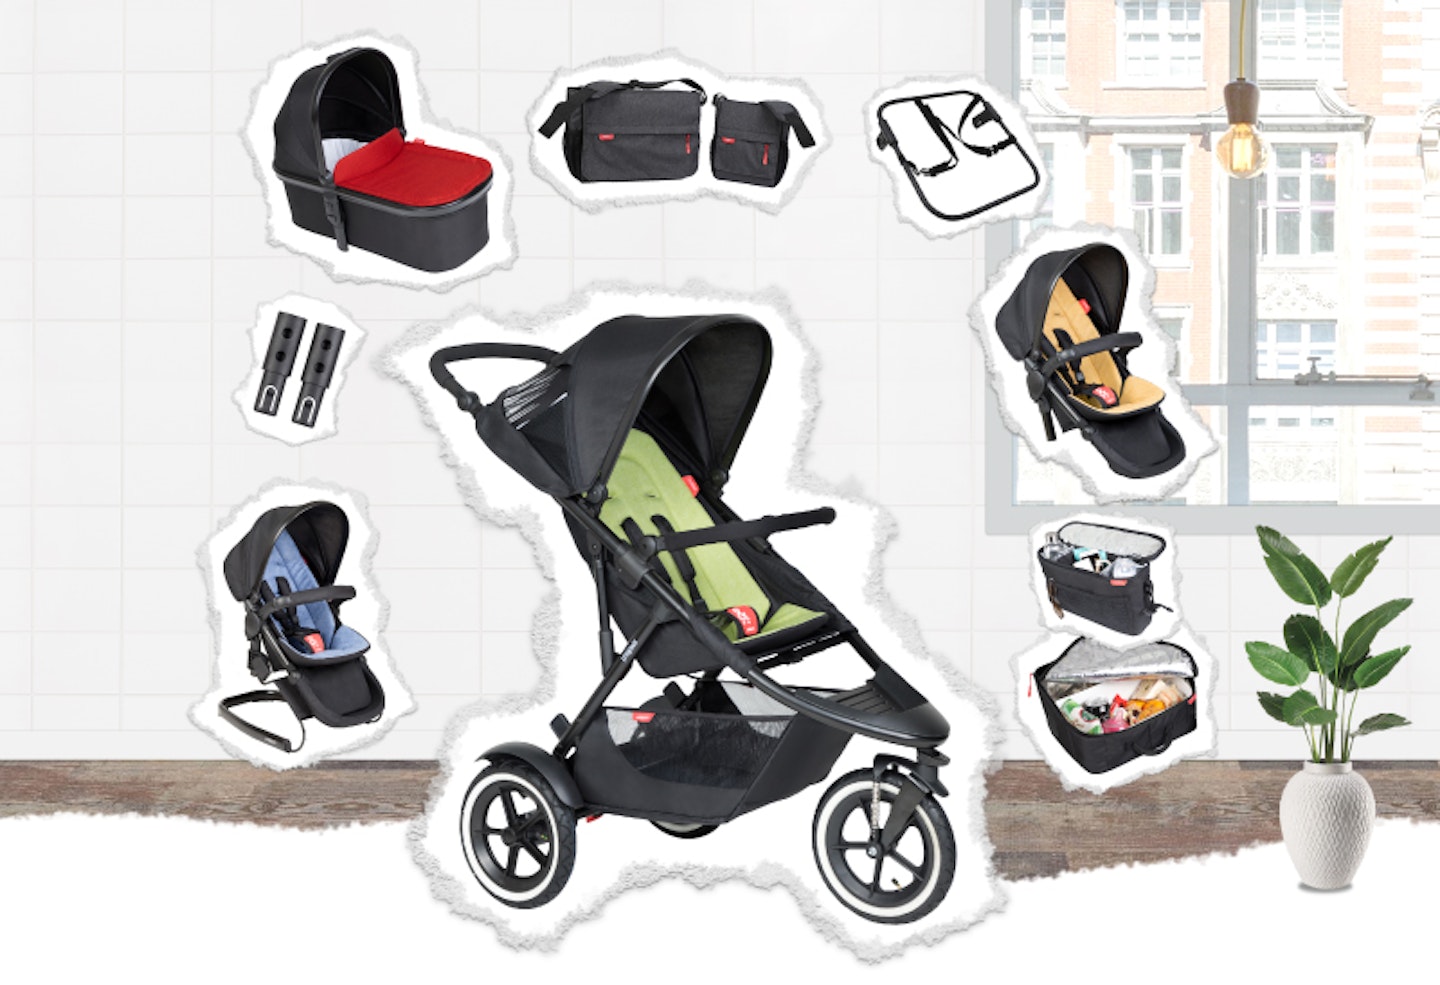 Why we’re loving the latest range of pushchairs by phil&teds